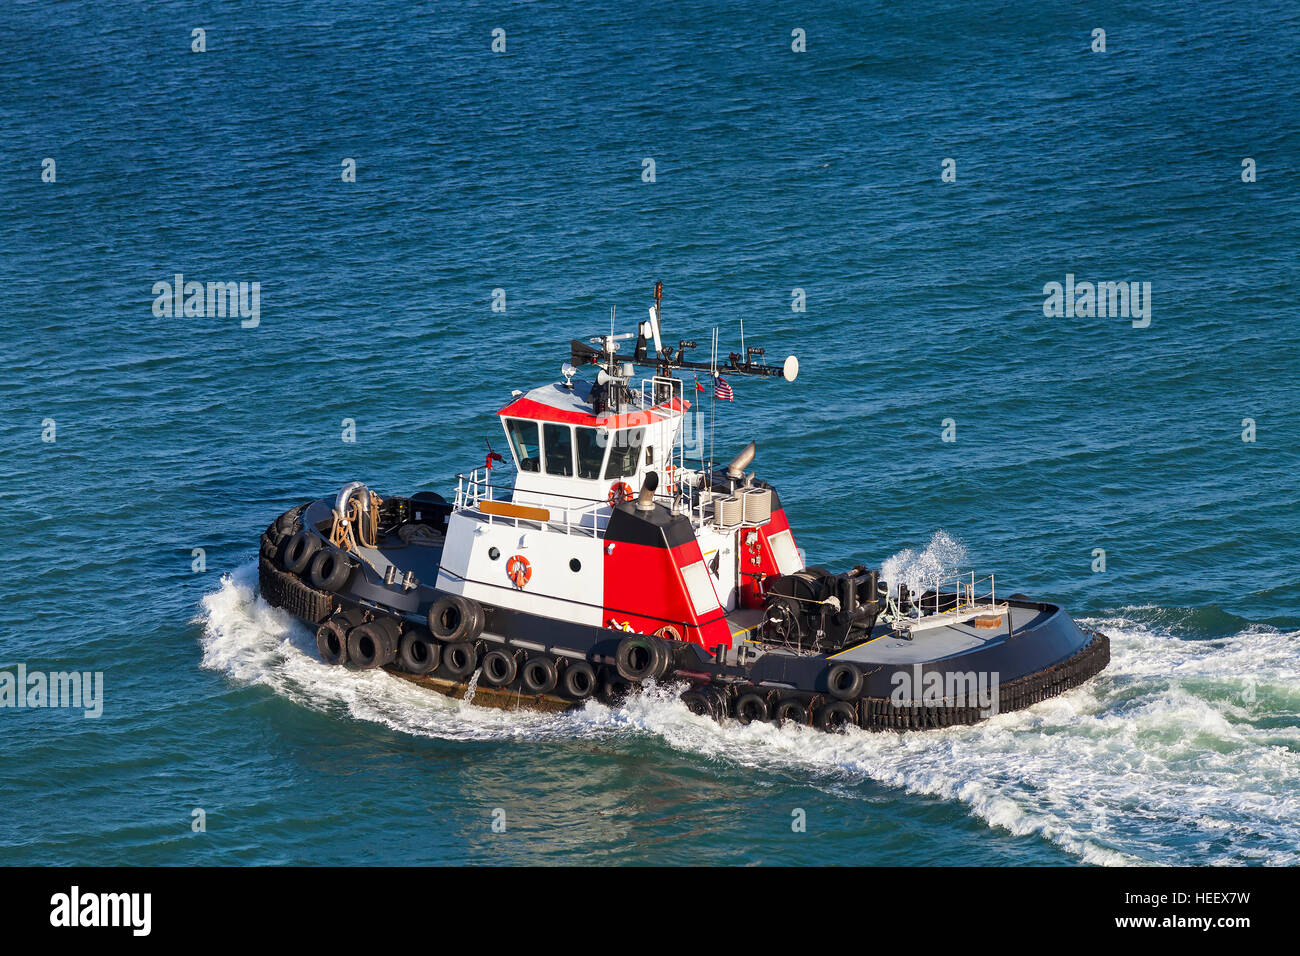 Red and White Tug Boat on the open ocean from above. Stock Photo